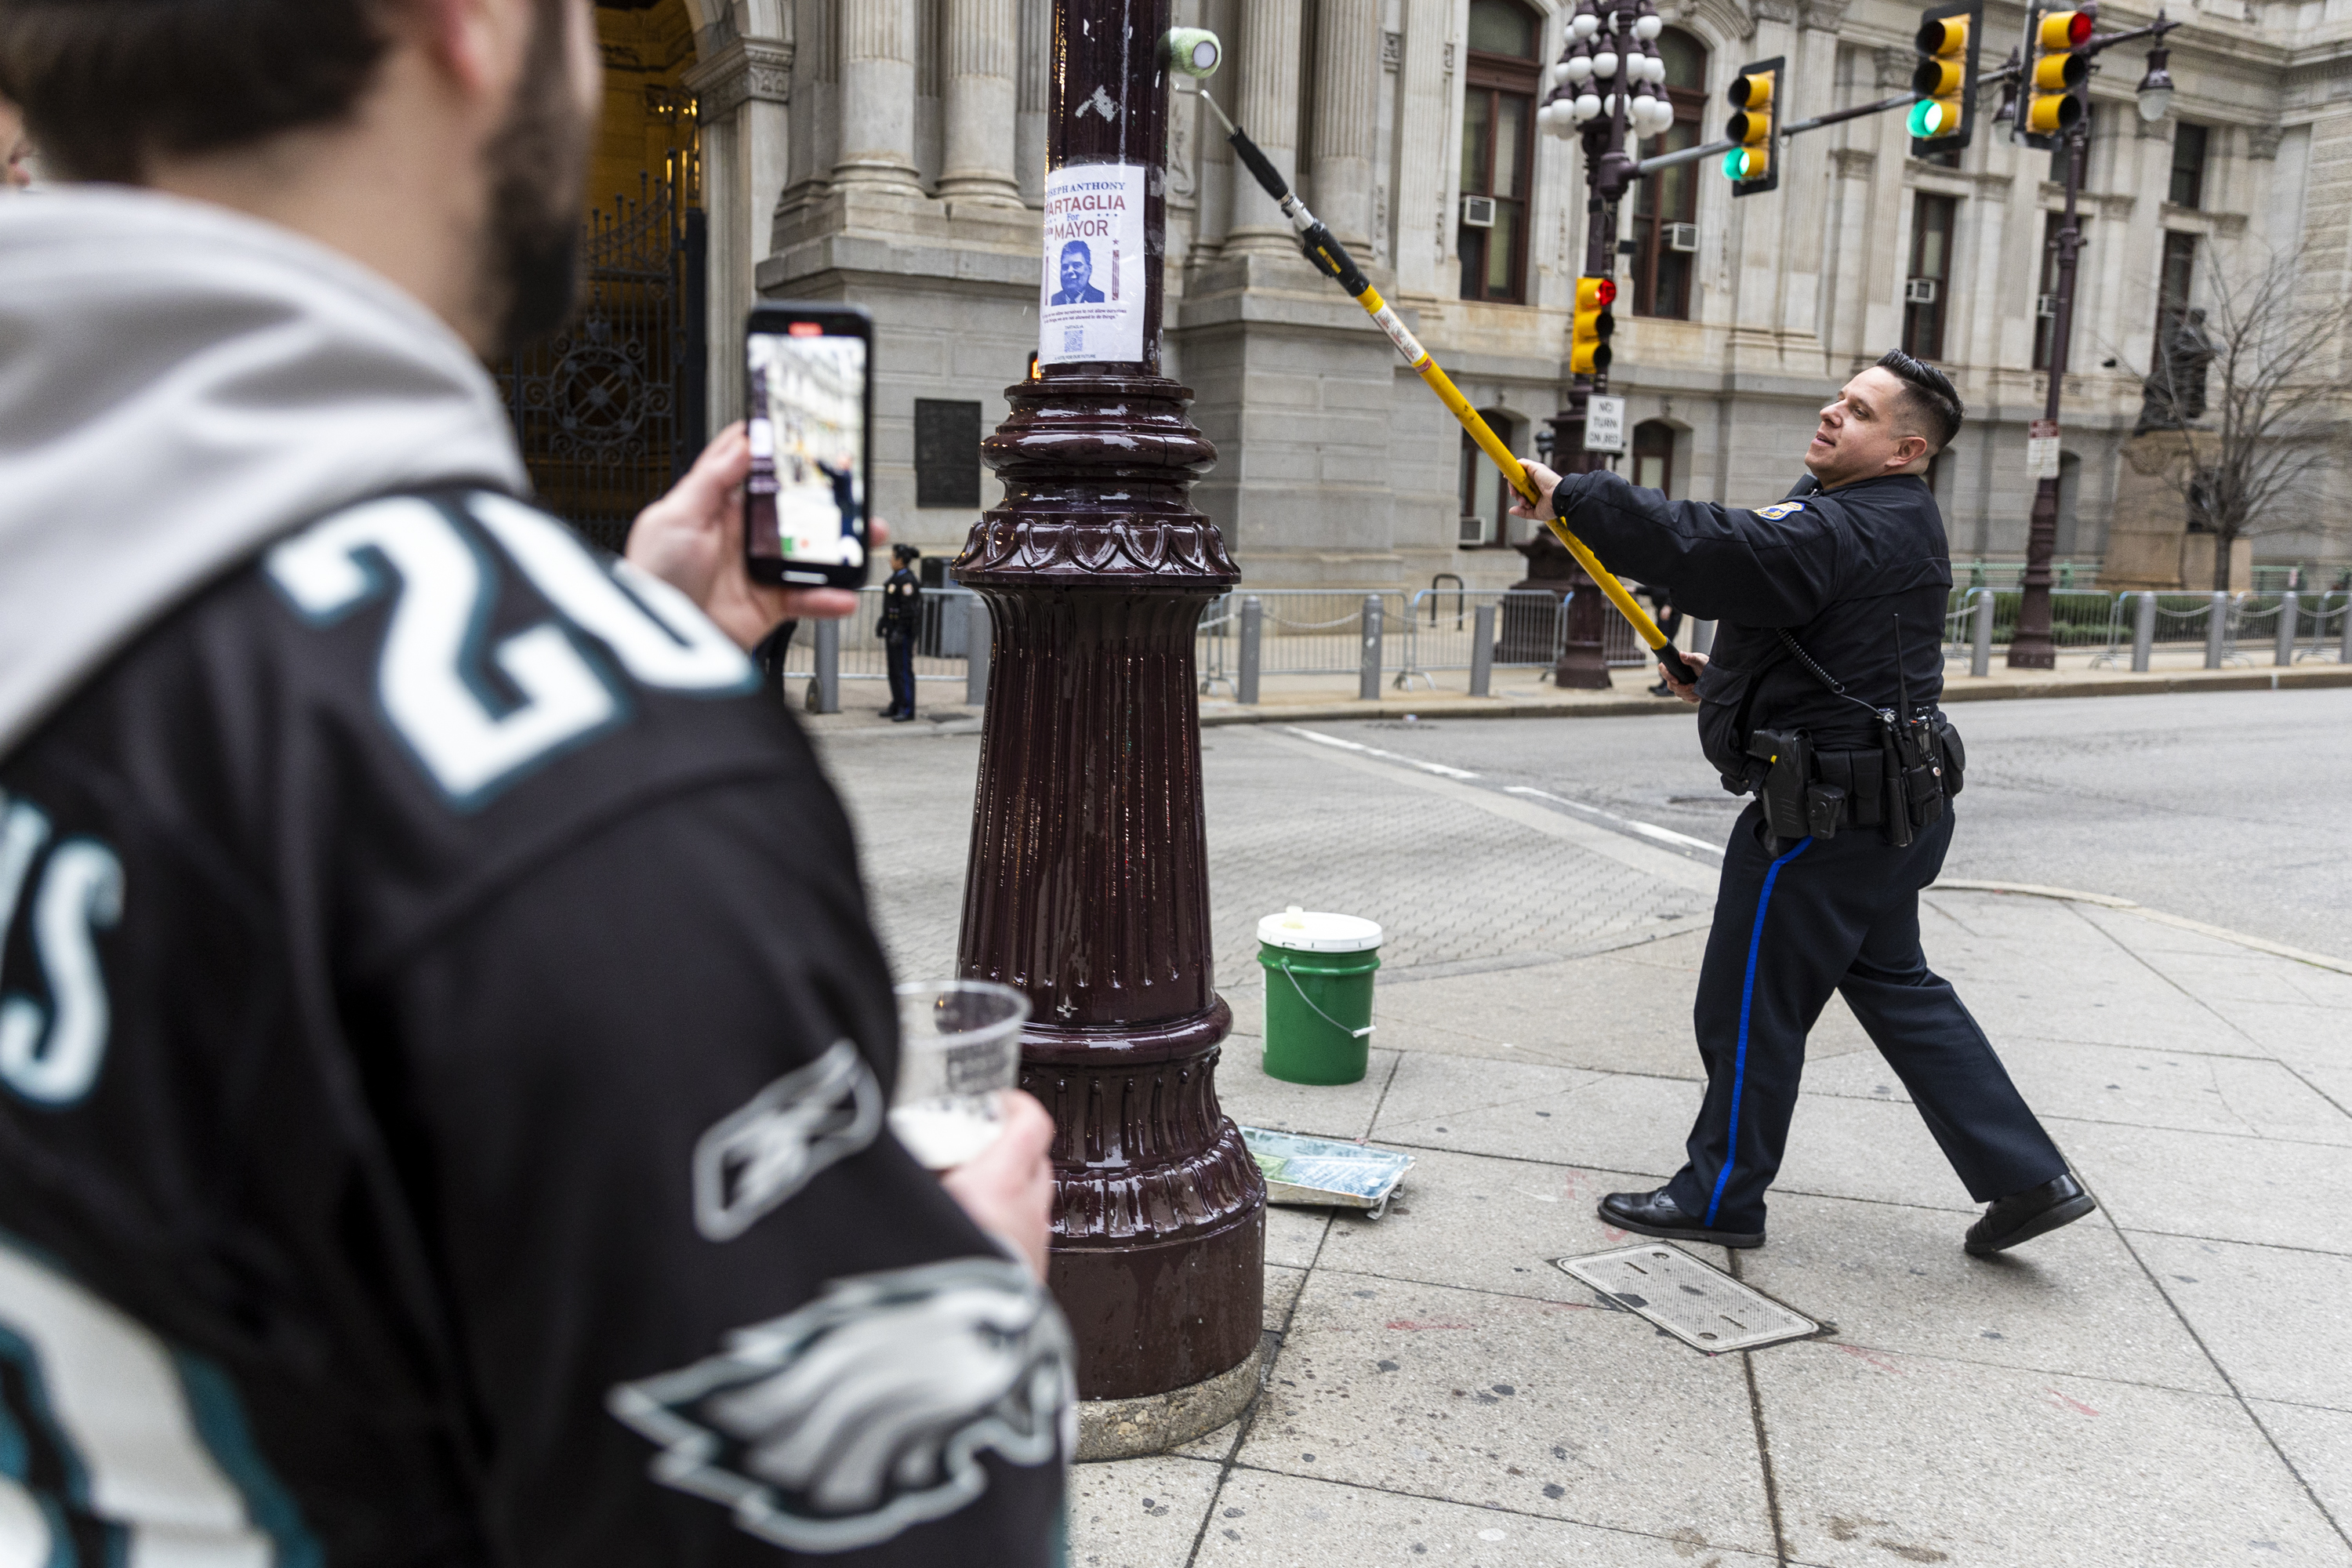 Philadelphia Eagles are headed to the Super Bowl — to face Andy